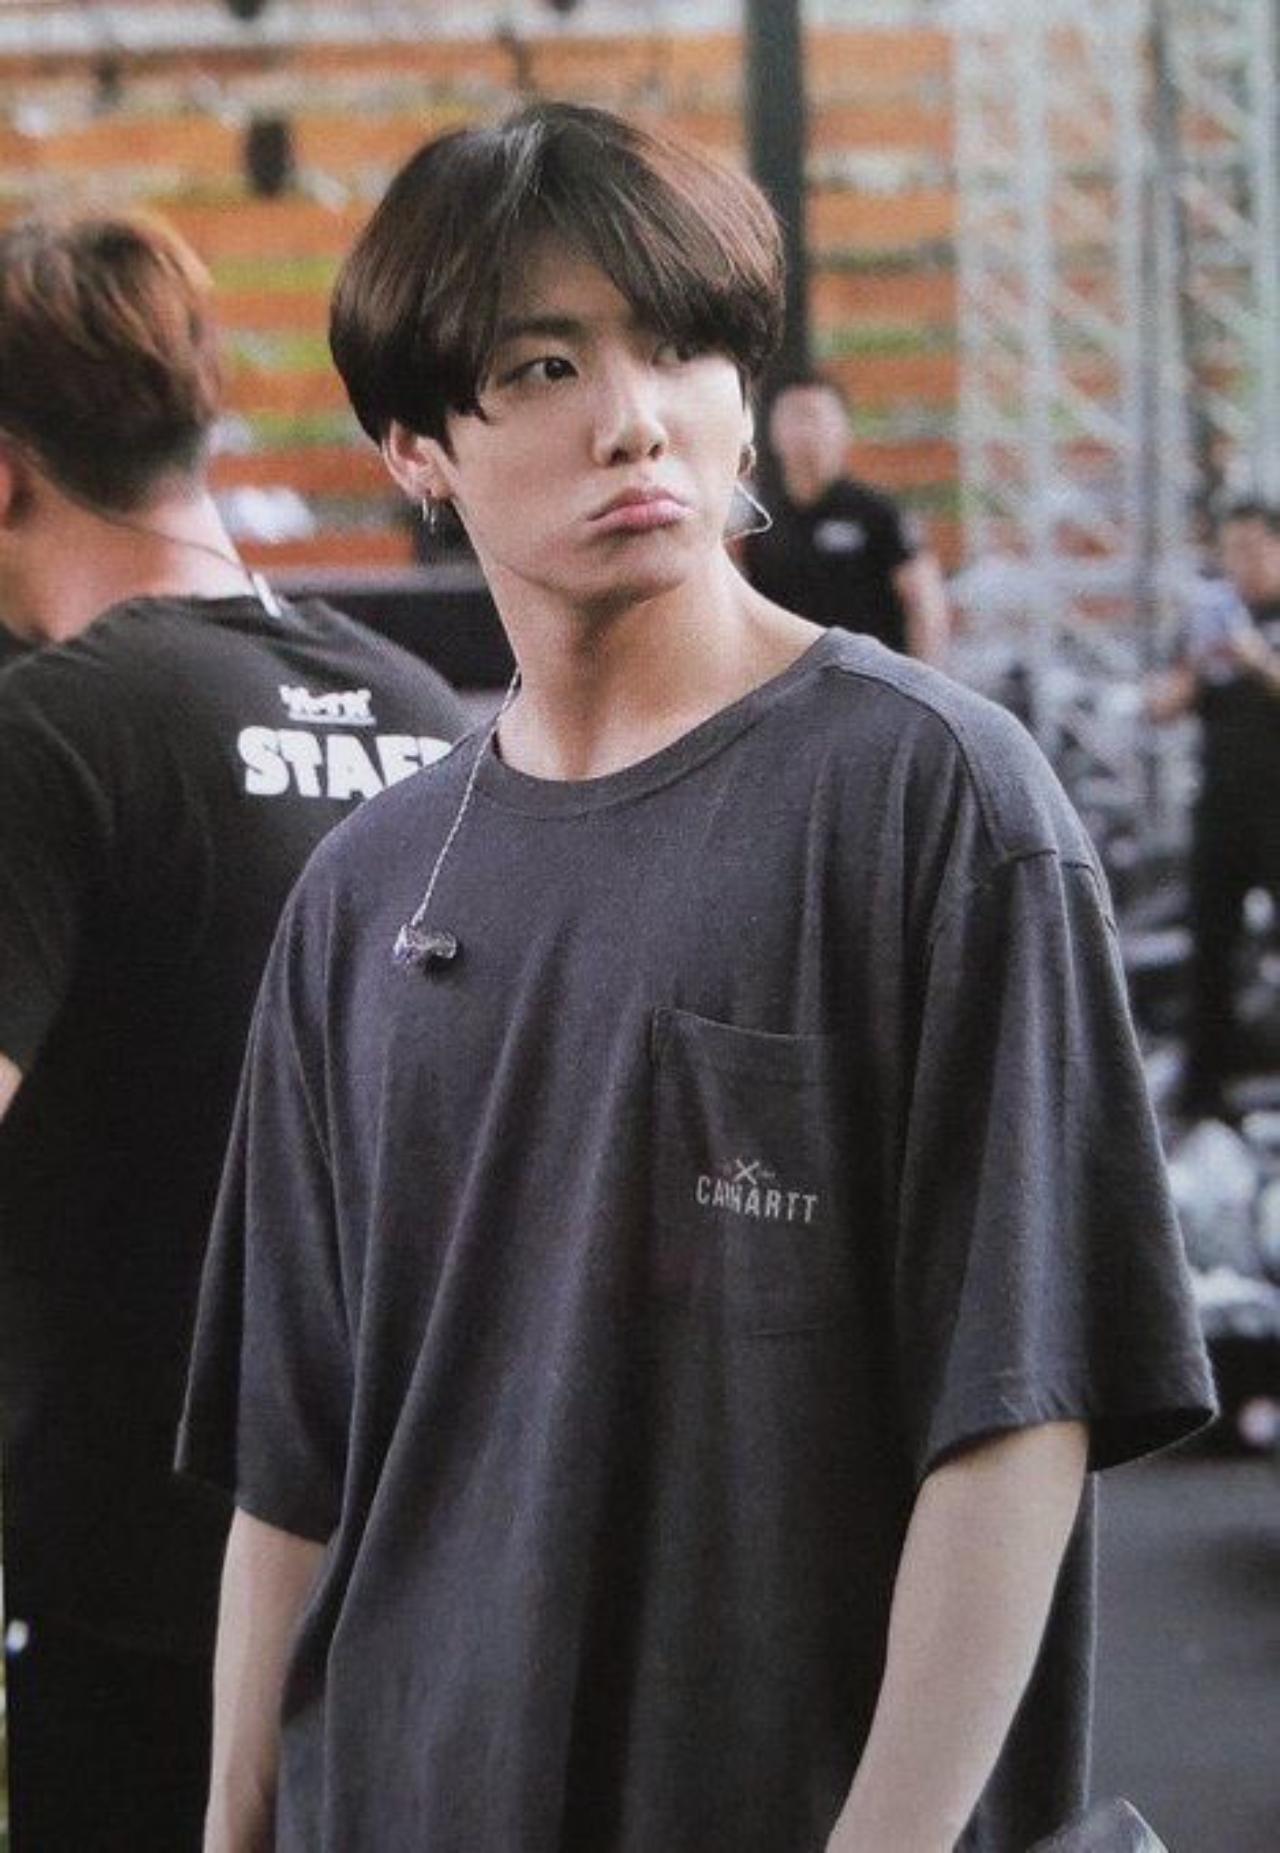 Two things instantly come to mind when ARMYs think about Jungkook's fashion sense - black and oversized! No matter how much designerwear Jungkook might don, we know that his wardrobe is filled with comfortable, black oversized t-shirts. Whether at concert soundchecks, airport looks or even while filming Run BTS! episodes, this combination can never go wrong with him